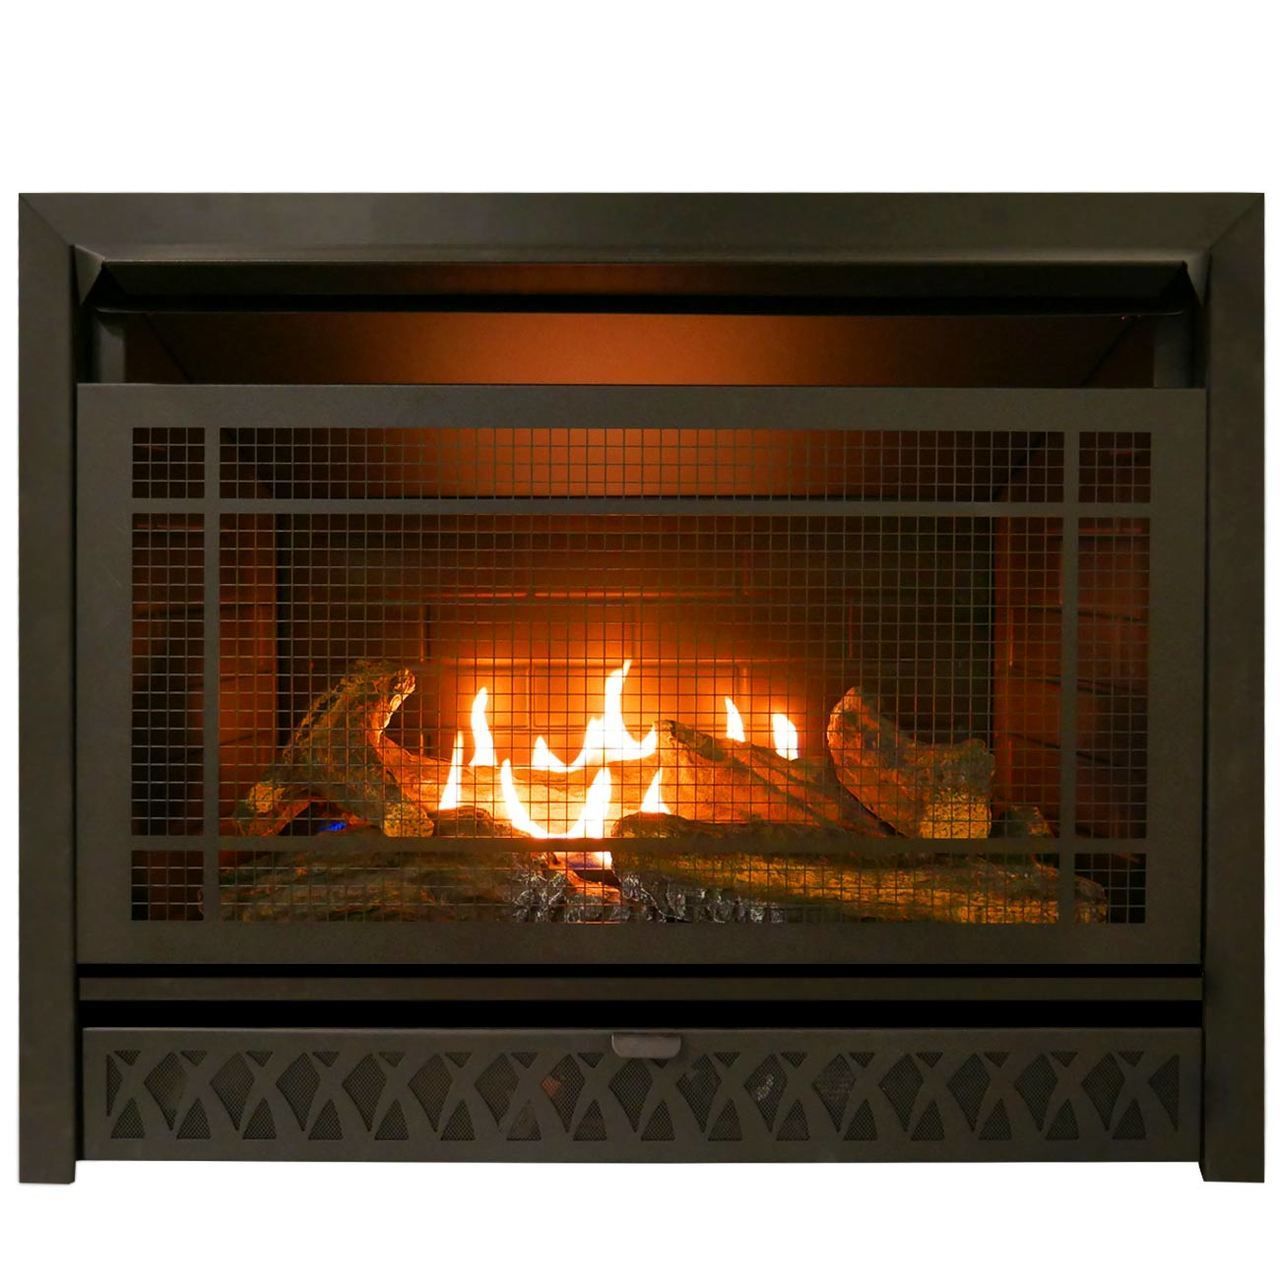 Indoor Gas Fireplace Insert Luxury Pro Fireplaces 29 In Ventless Dual Fuel Firebox Insert